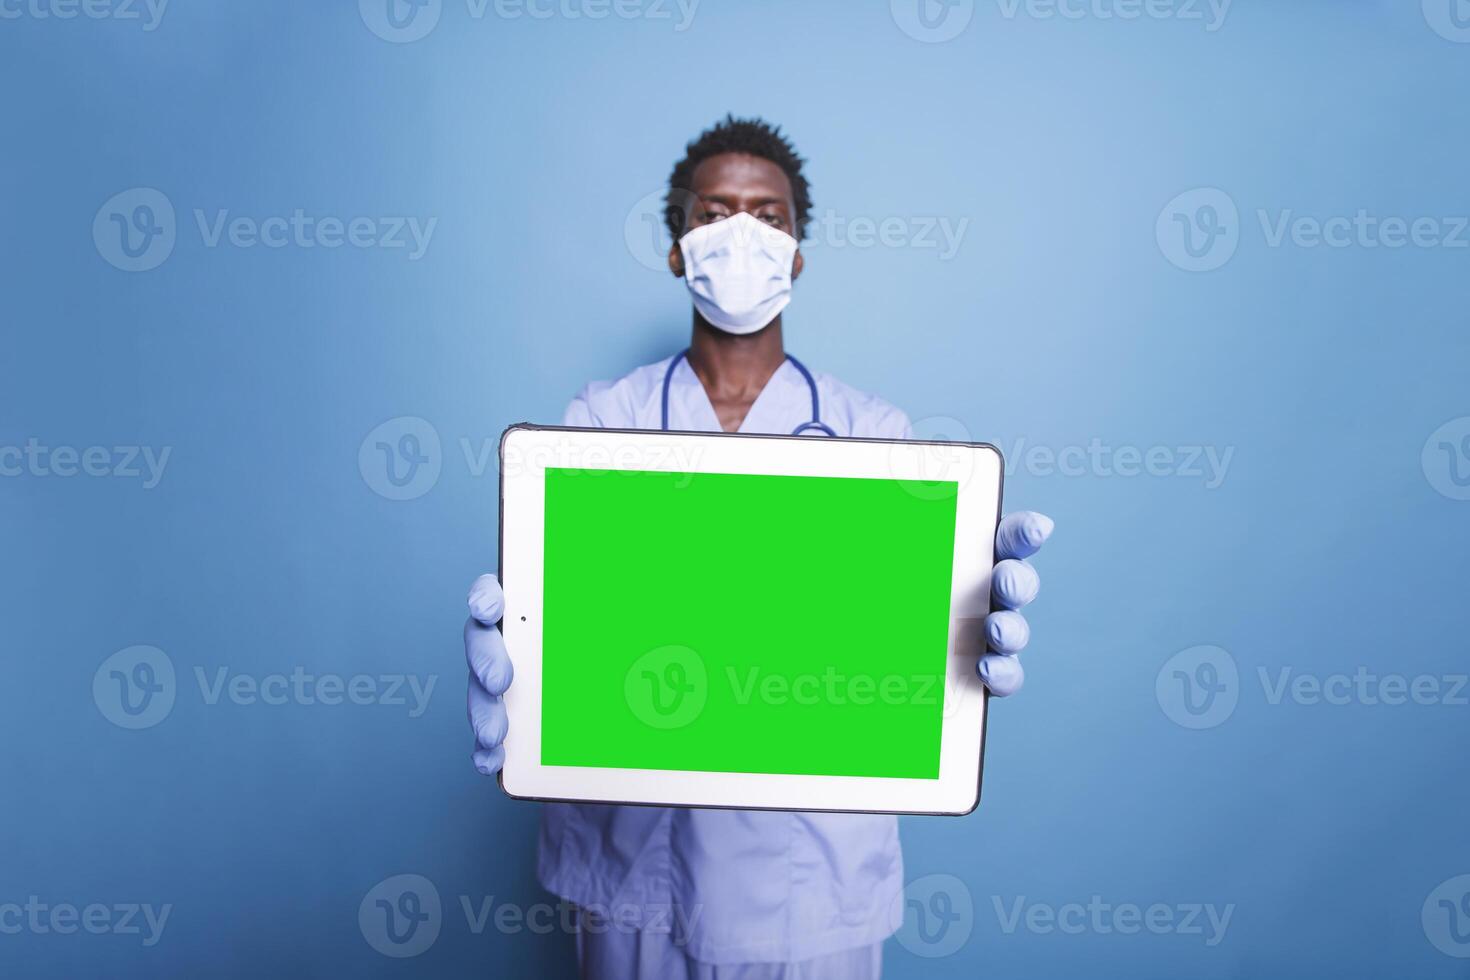 Male healthcare professional stands with a tablet displaying blank green screen while wearing scrubs and face mask. Holding digital device with chromakey template is a black man. photo